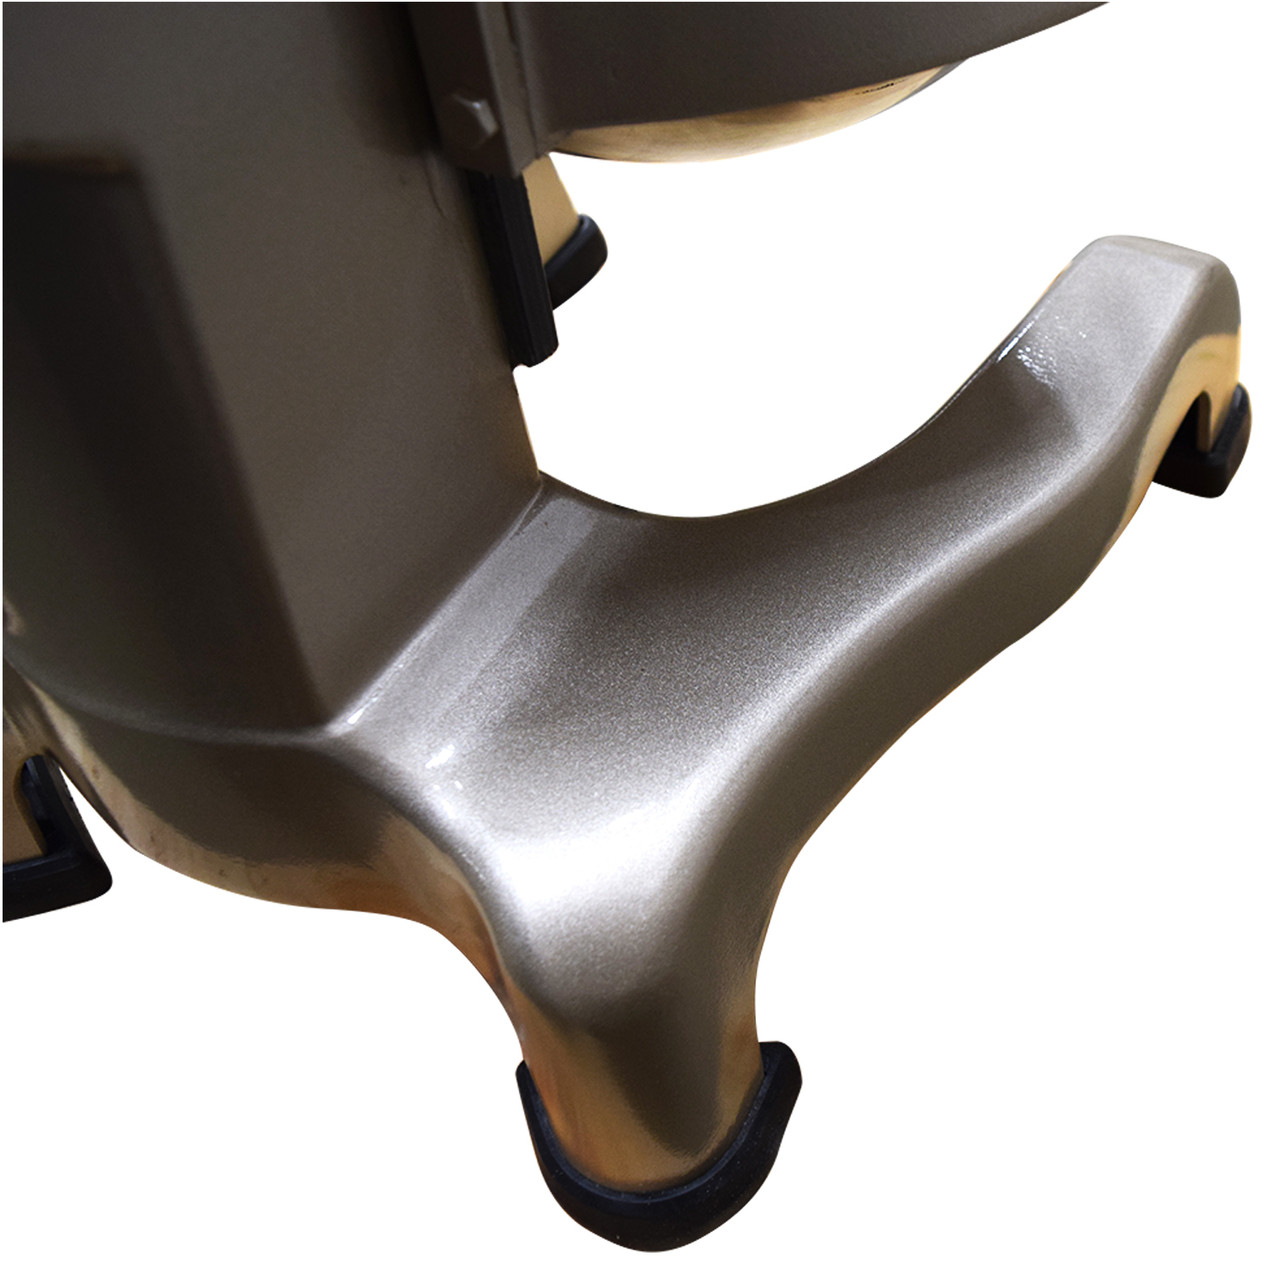 AEG-20A 20 Quart Commercial Planetary Mixer Base Stand Detail